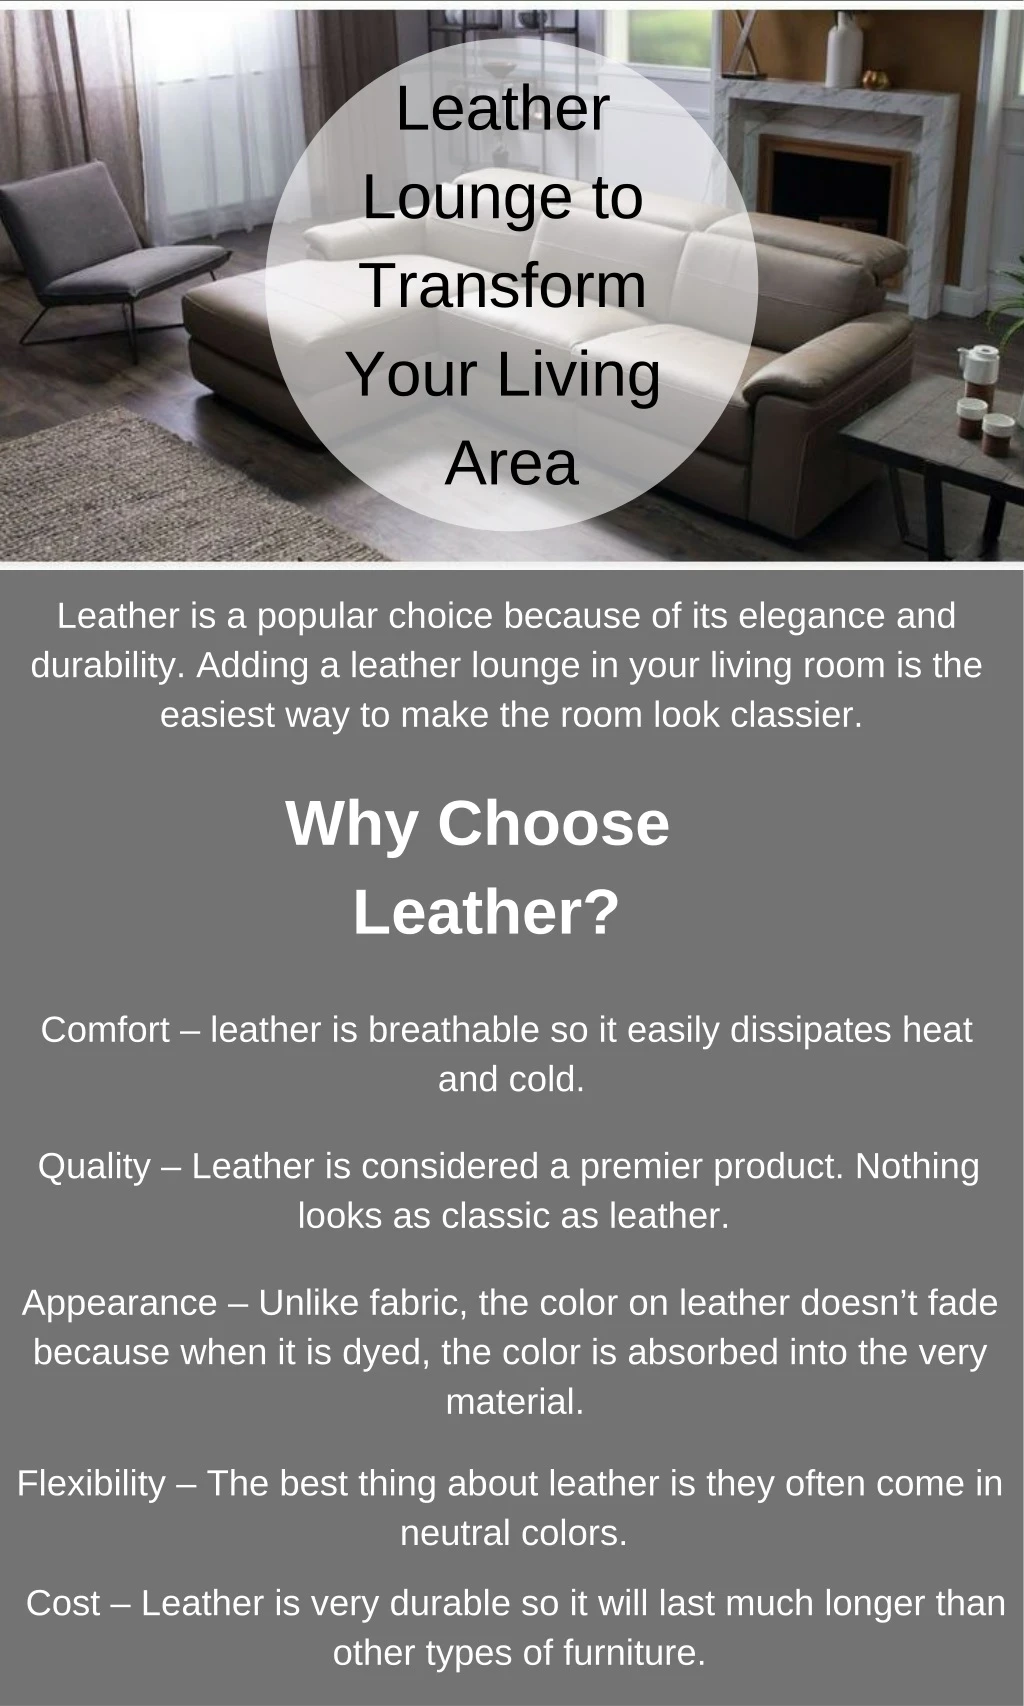 leather lounge to transform your living area